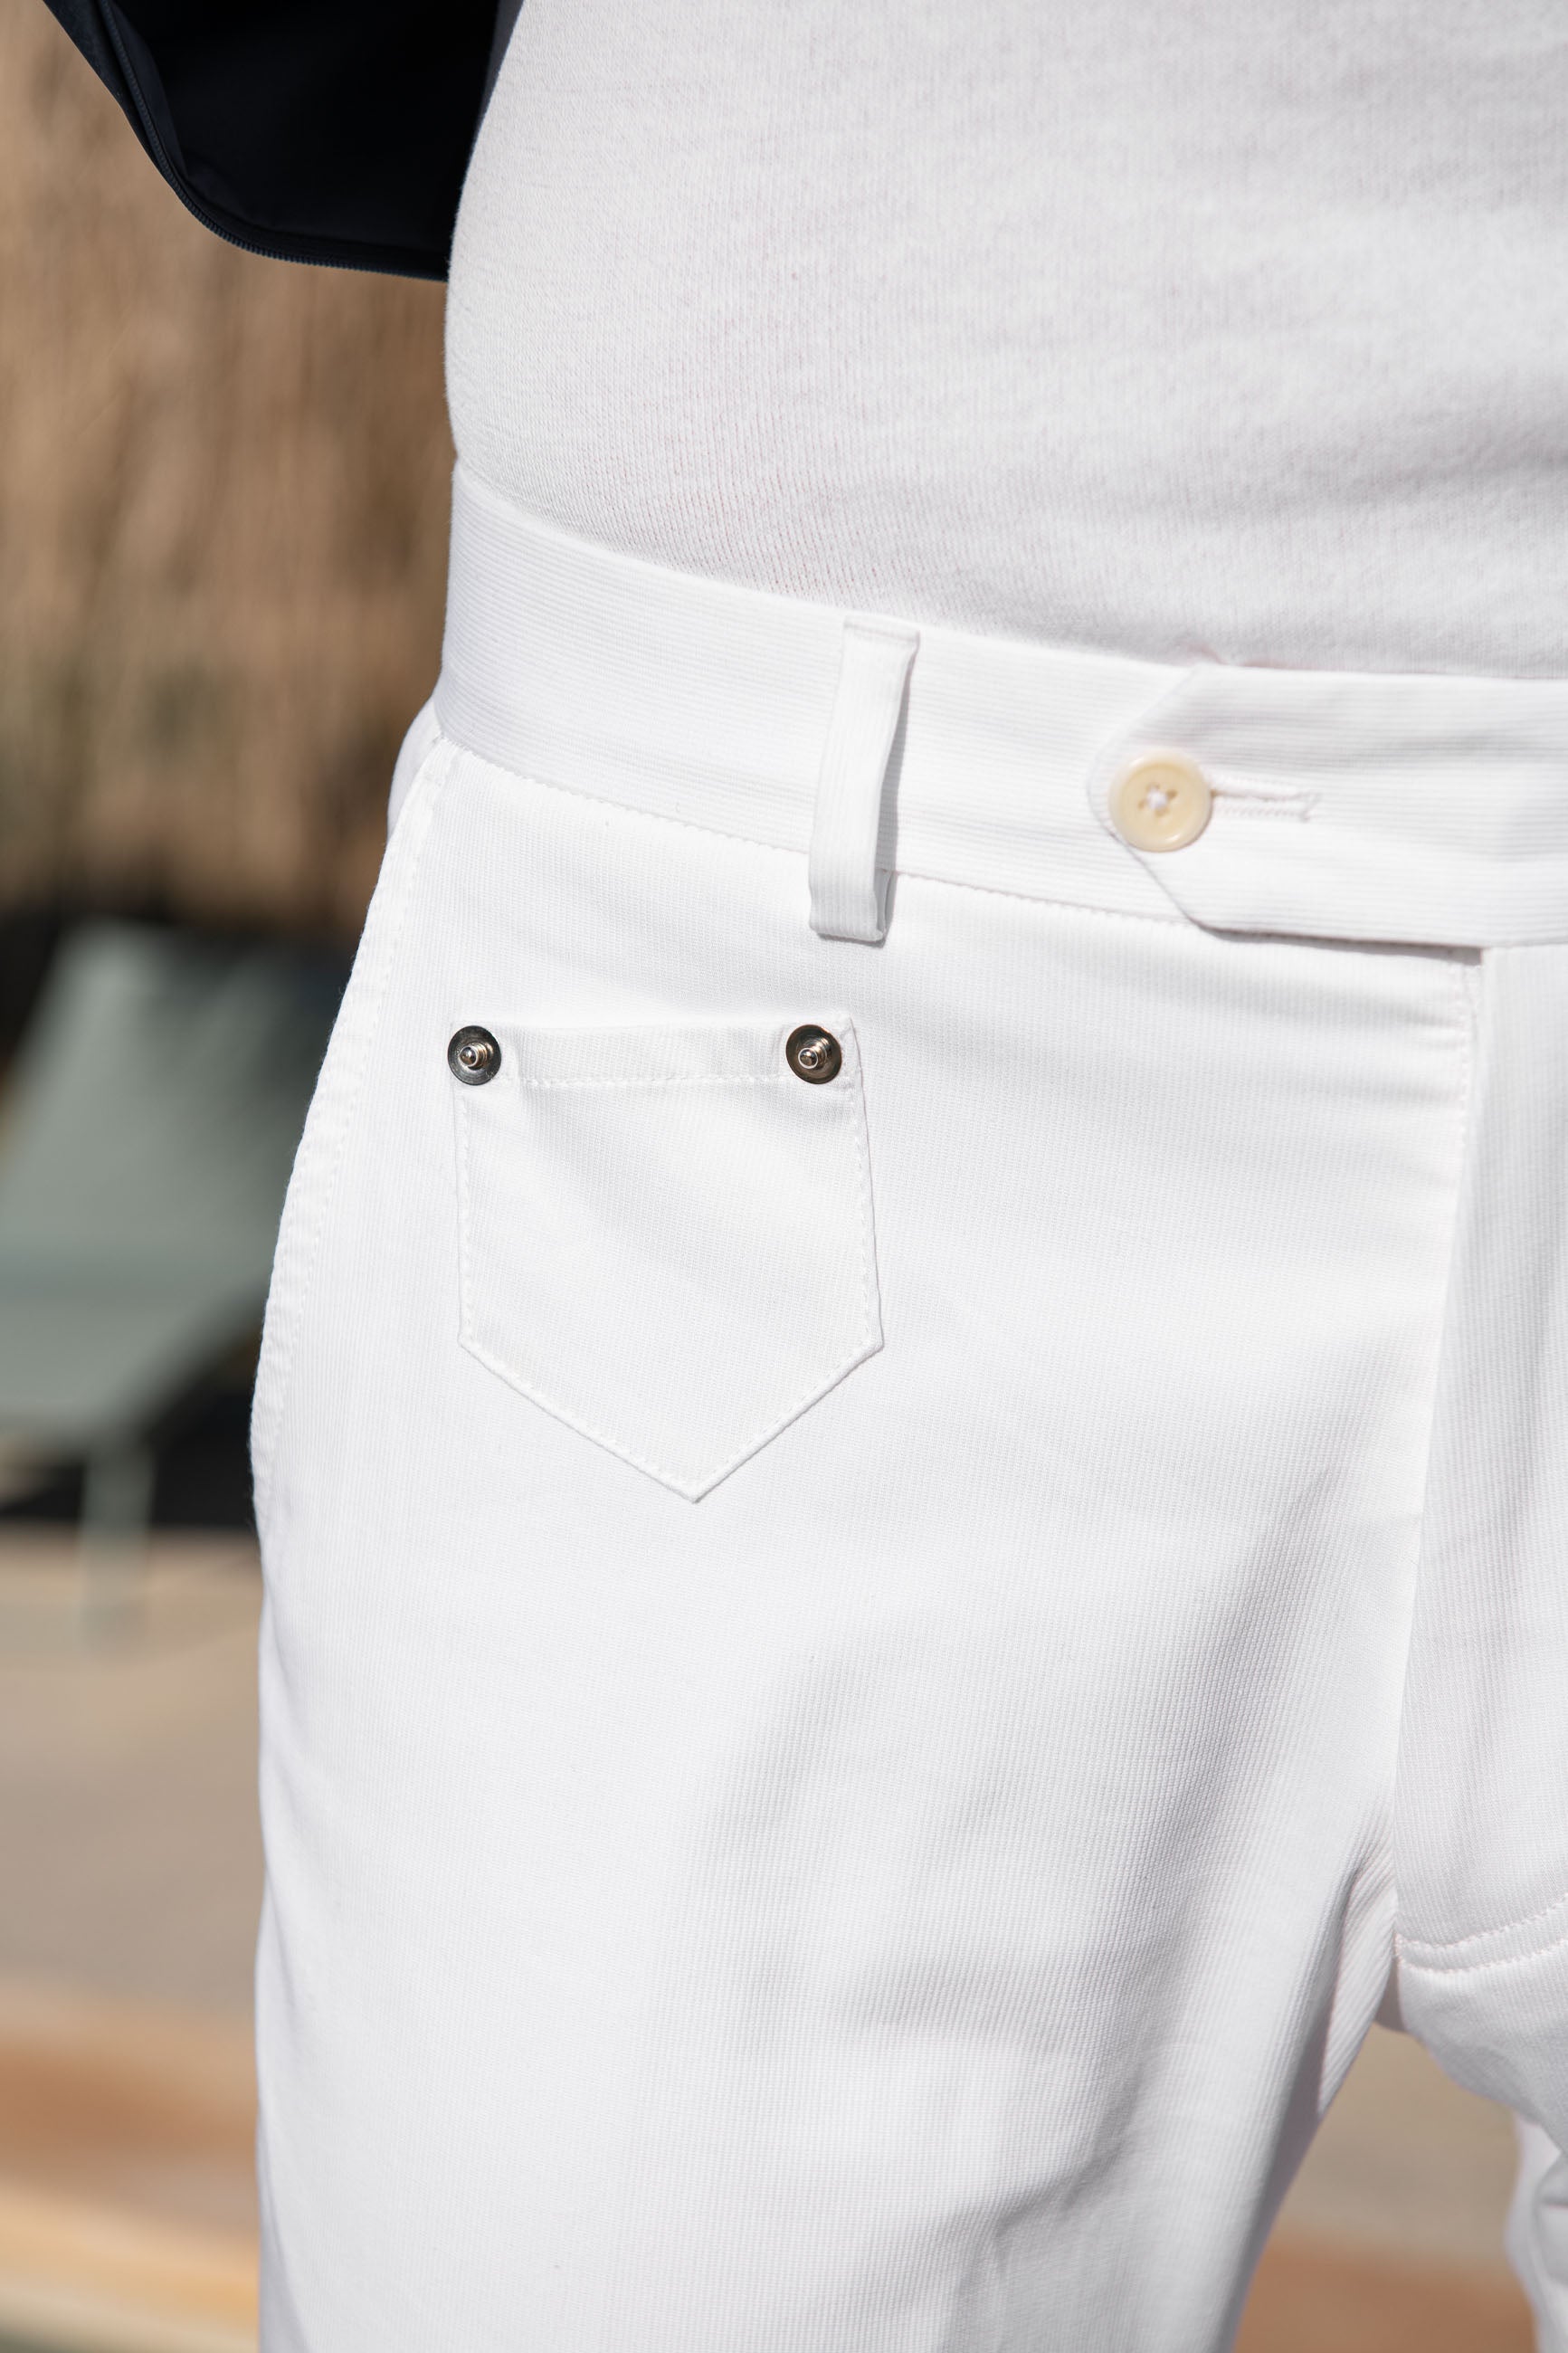 White Cotton trousers, Sirmione Trousers, Cotton Trousers with Coin pocket, White summer cotton trousers, Pantalon en coton blanc, Pantalon Sirmione, Pantalon en coton avec poche à monnaie, Pantalon d'été en coton blanc, Pantaloni in cotone bianco, Pantaloni Sirmione, Pantaloni in cotone con tasca portamonete, Pantaloni estivi in cotone bianco,